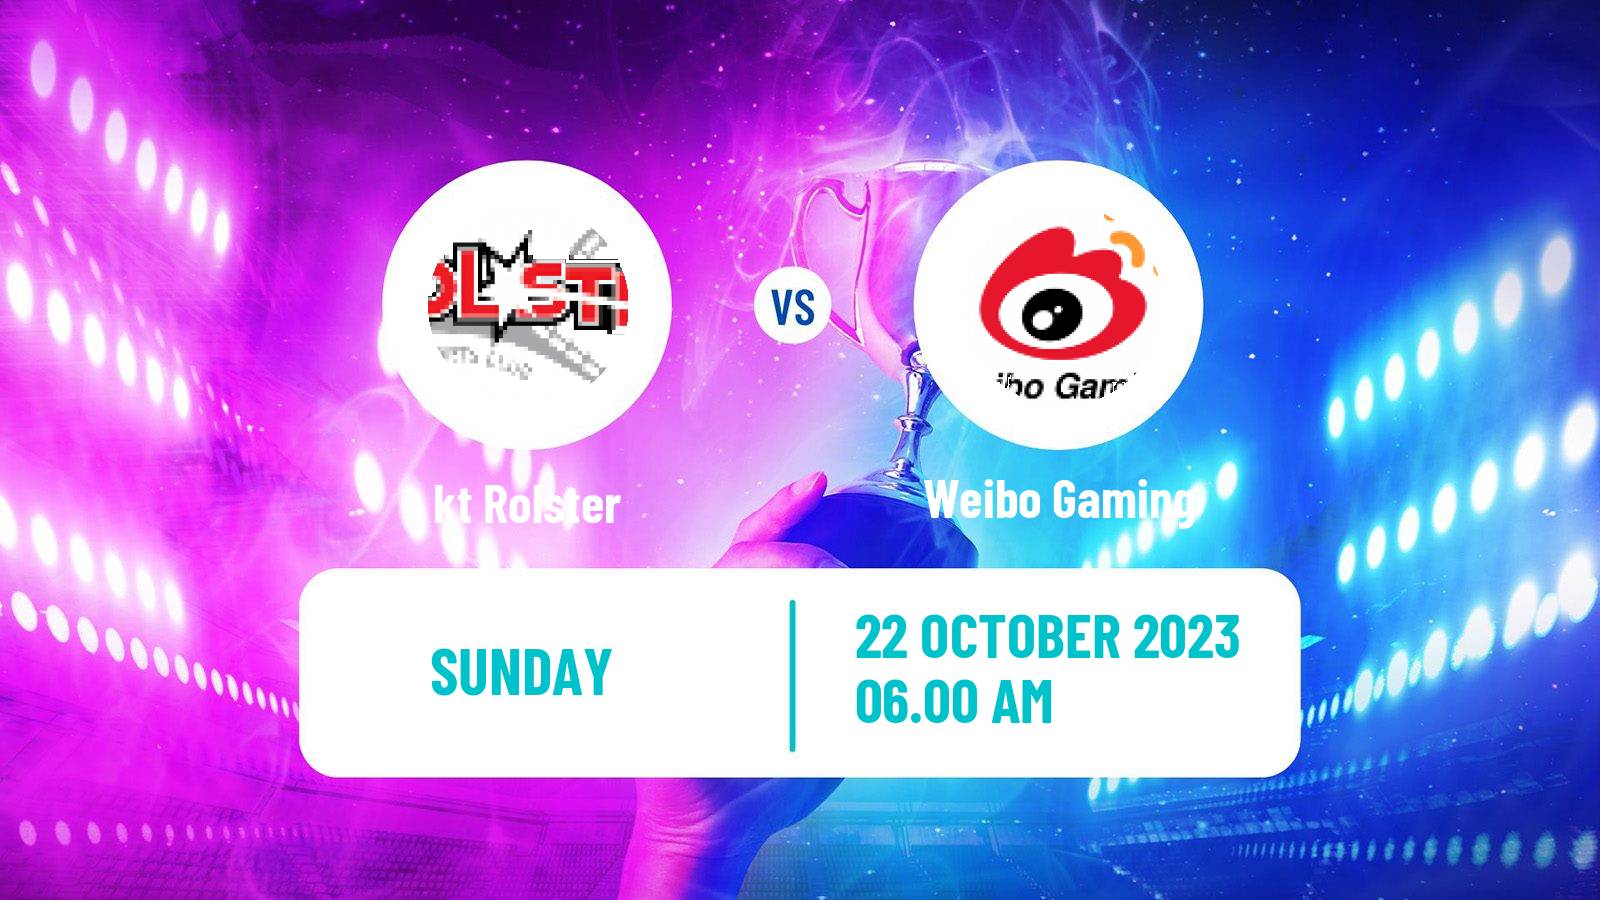 Esports League Of Legends World Championship kt Rolster - Weibo Gaming